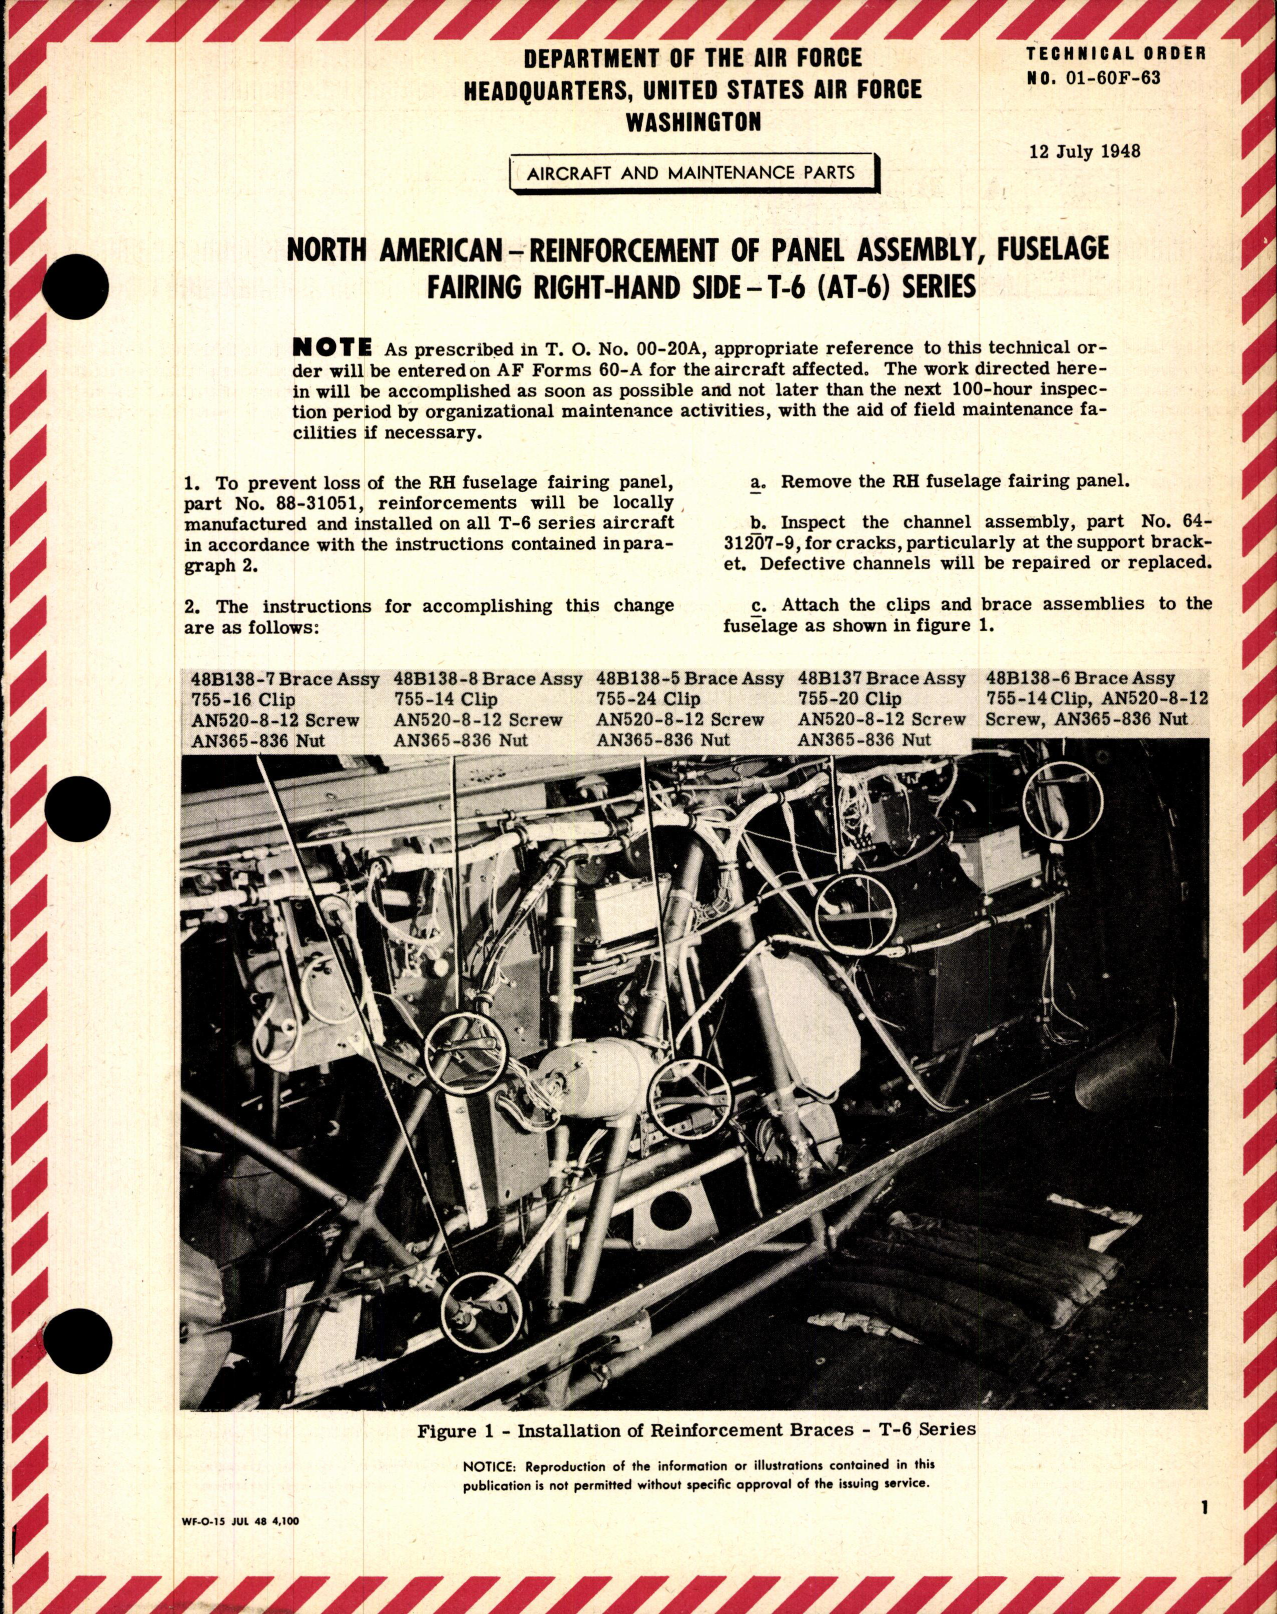 Sample page 1 from AirCorps Library document: Reinforcement of Panel Assembly, Fuselage Fairing Right Hand Side for T-6 (AT-6) Series